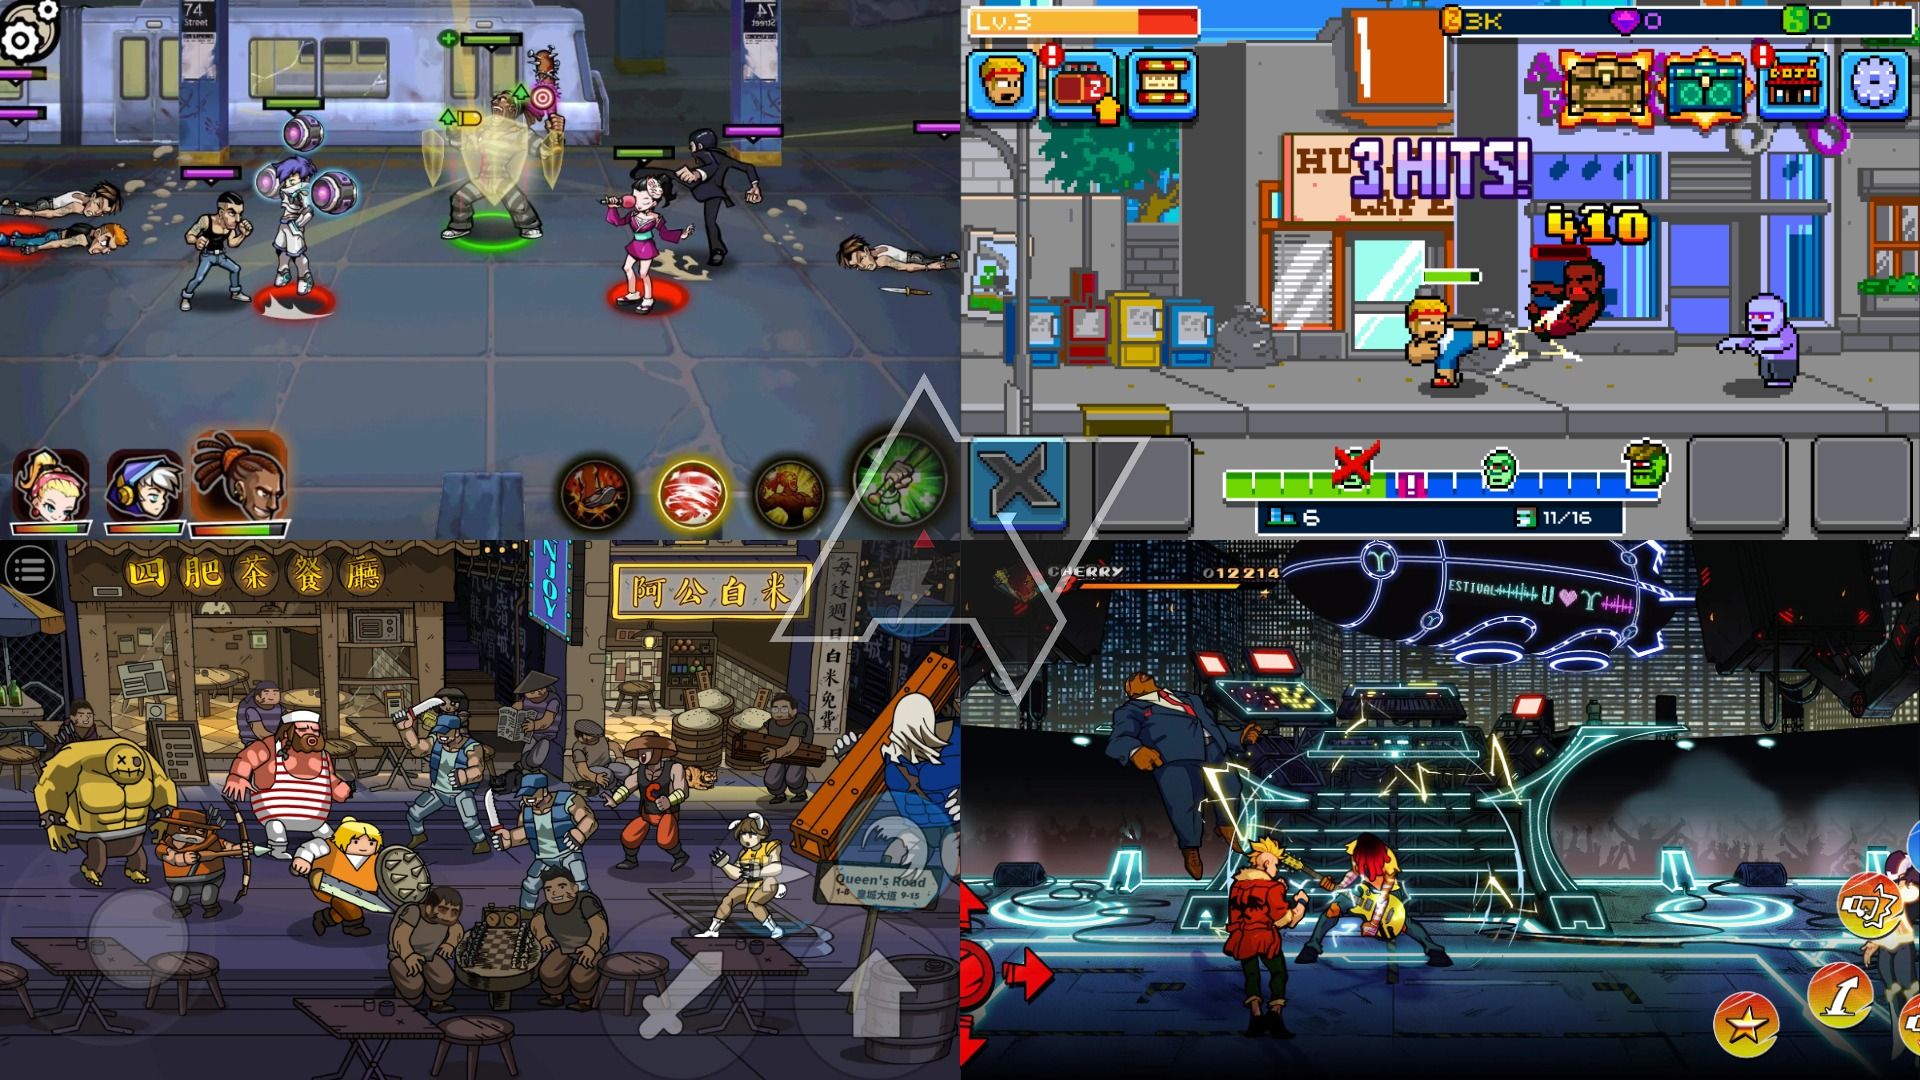 best-beat-em-up-games-collage-brutal-street-2-kung-fu-zombies-maximus-2-streets-of-rage-4